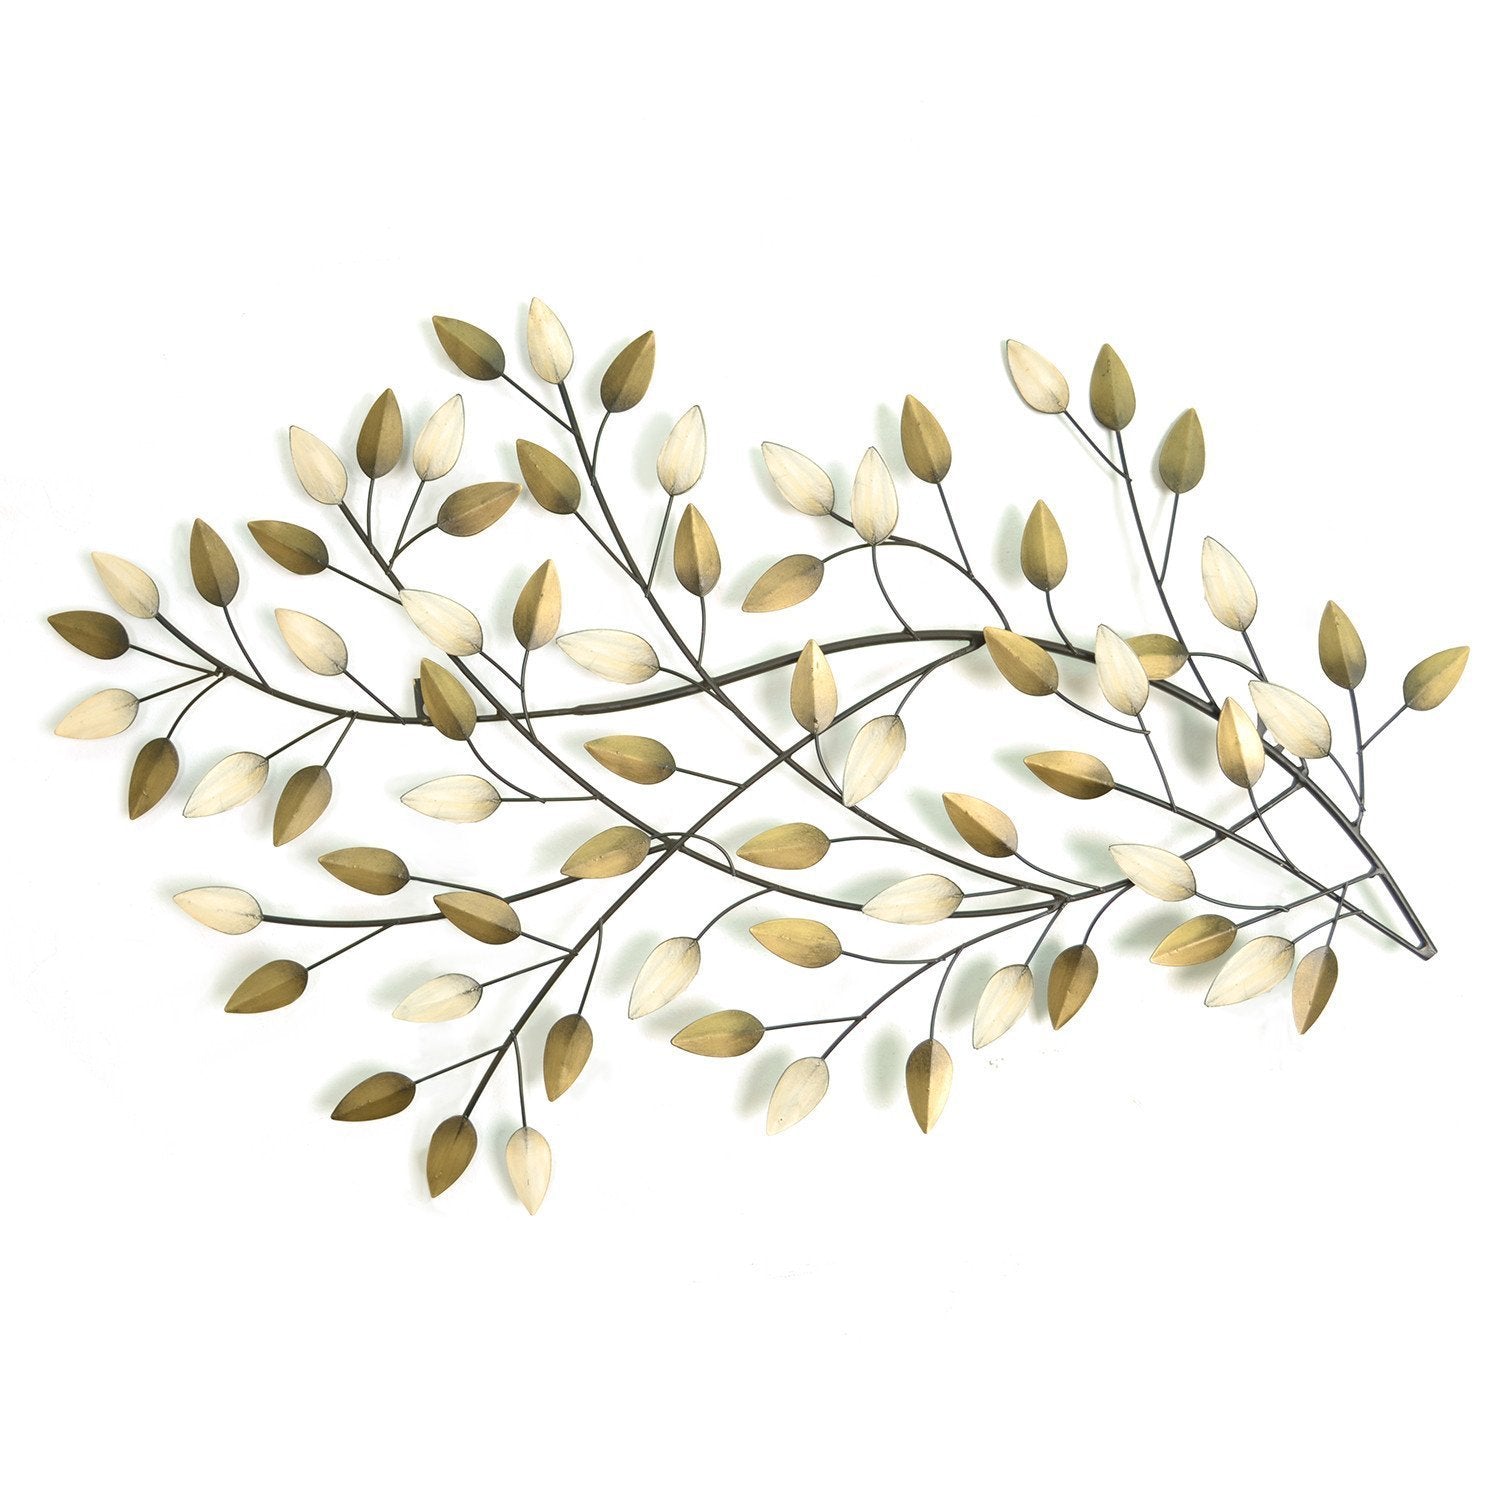 Gold and Beige Metal Blowing Leaves Wall Decor - Mahogany Home Essentialswall art